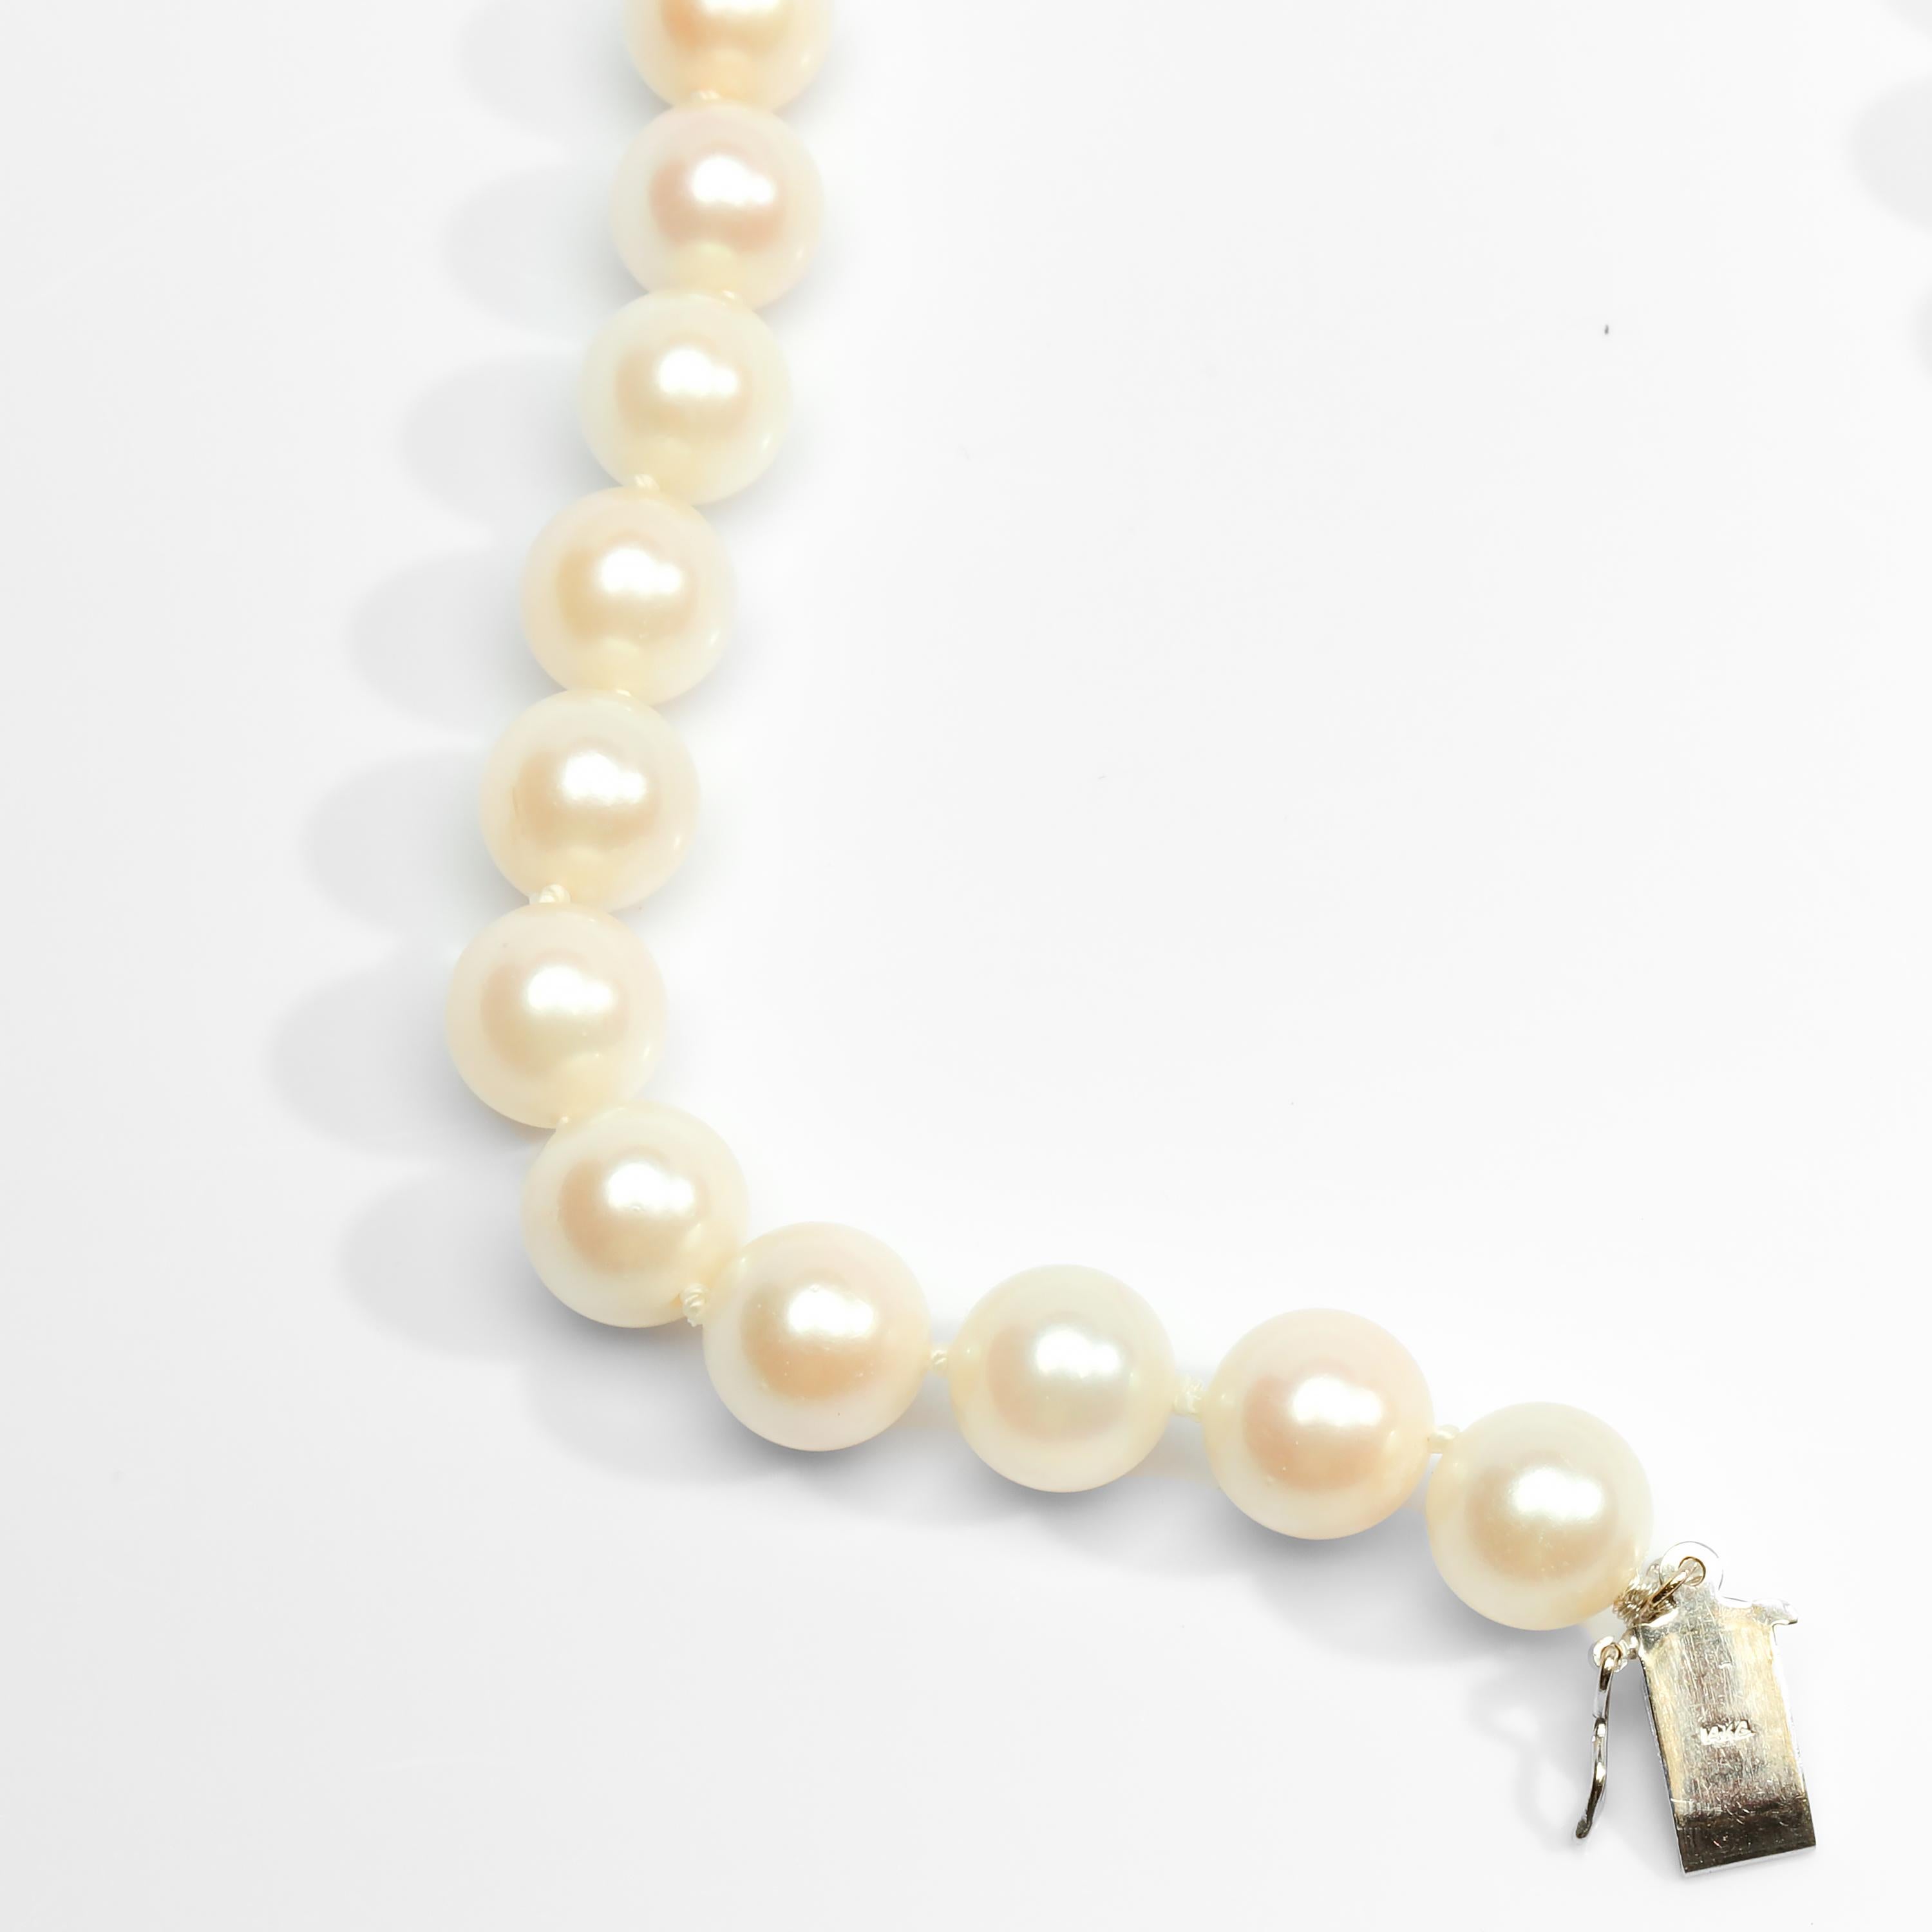 Vintage Akoya Pearl Necklace circa 1950s Thick Nacre & Classic Elegance 1